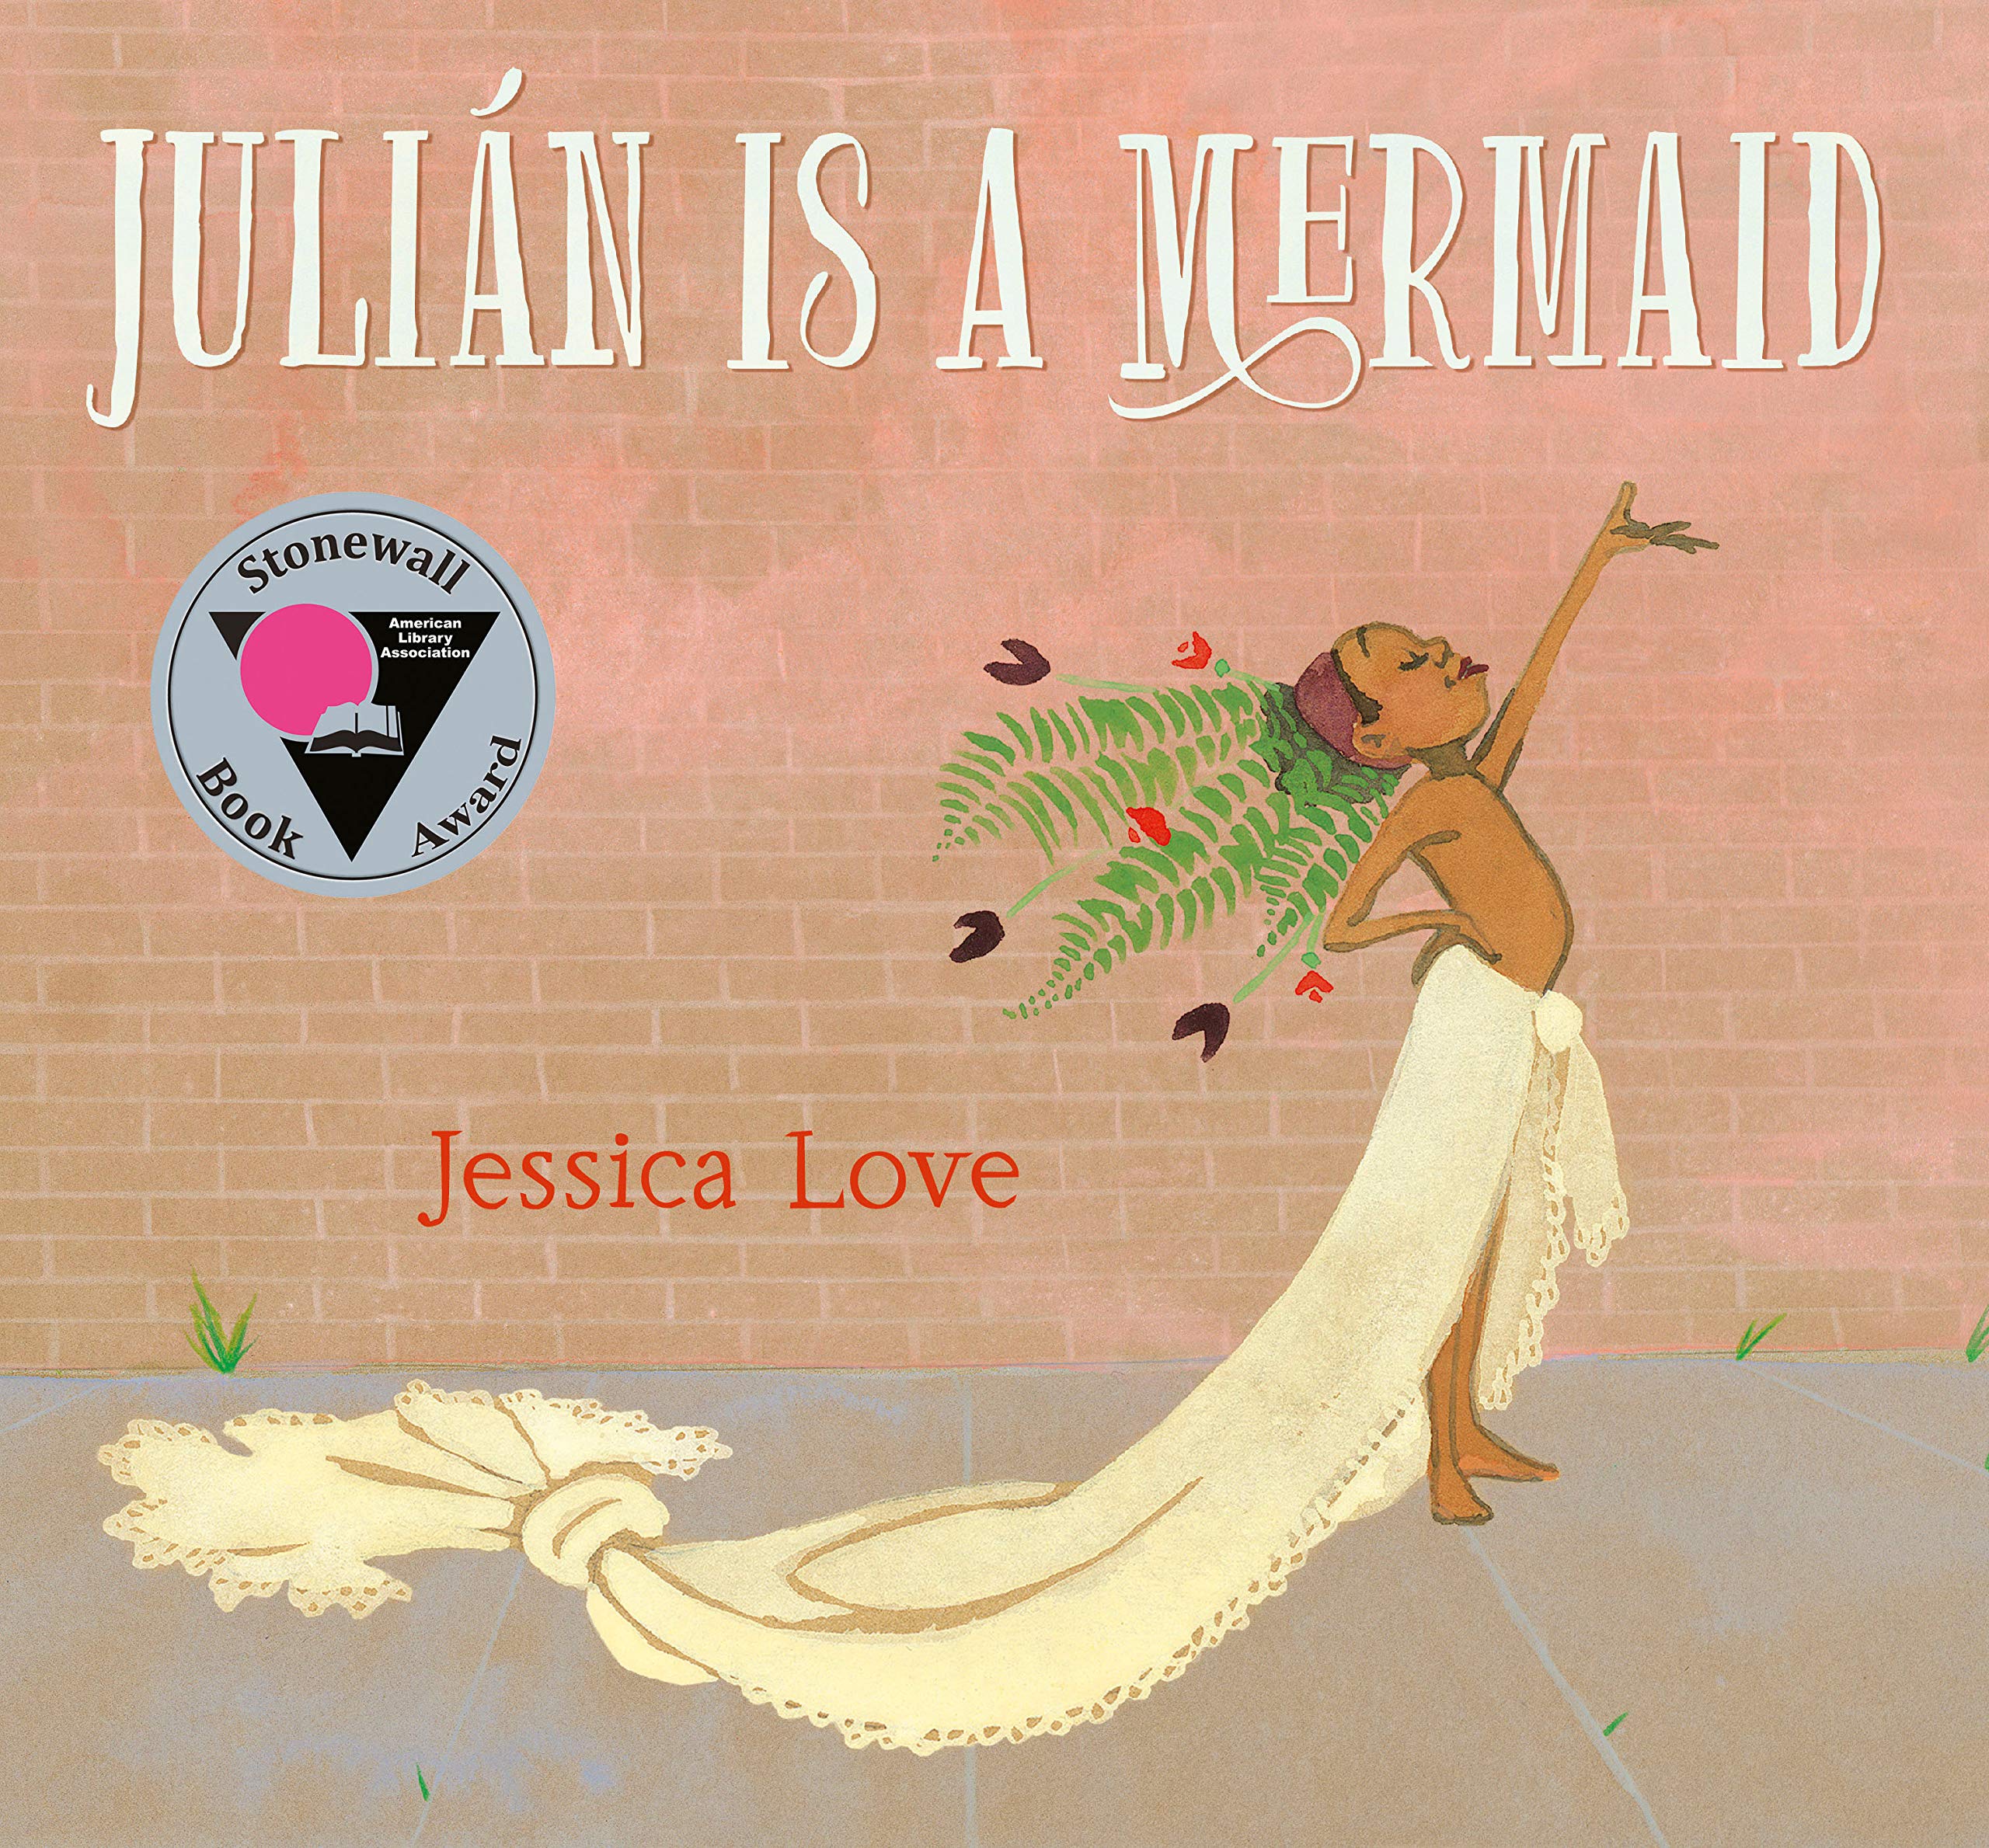 Buy Julián Is a Mermaid Book Online at Low Prices in India | Julián Is a  Mermaid Reviews & Ratings - Amazon.in